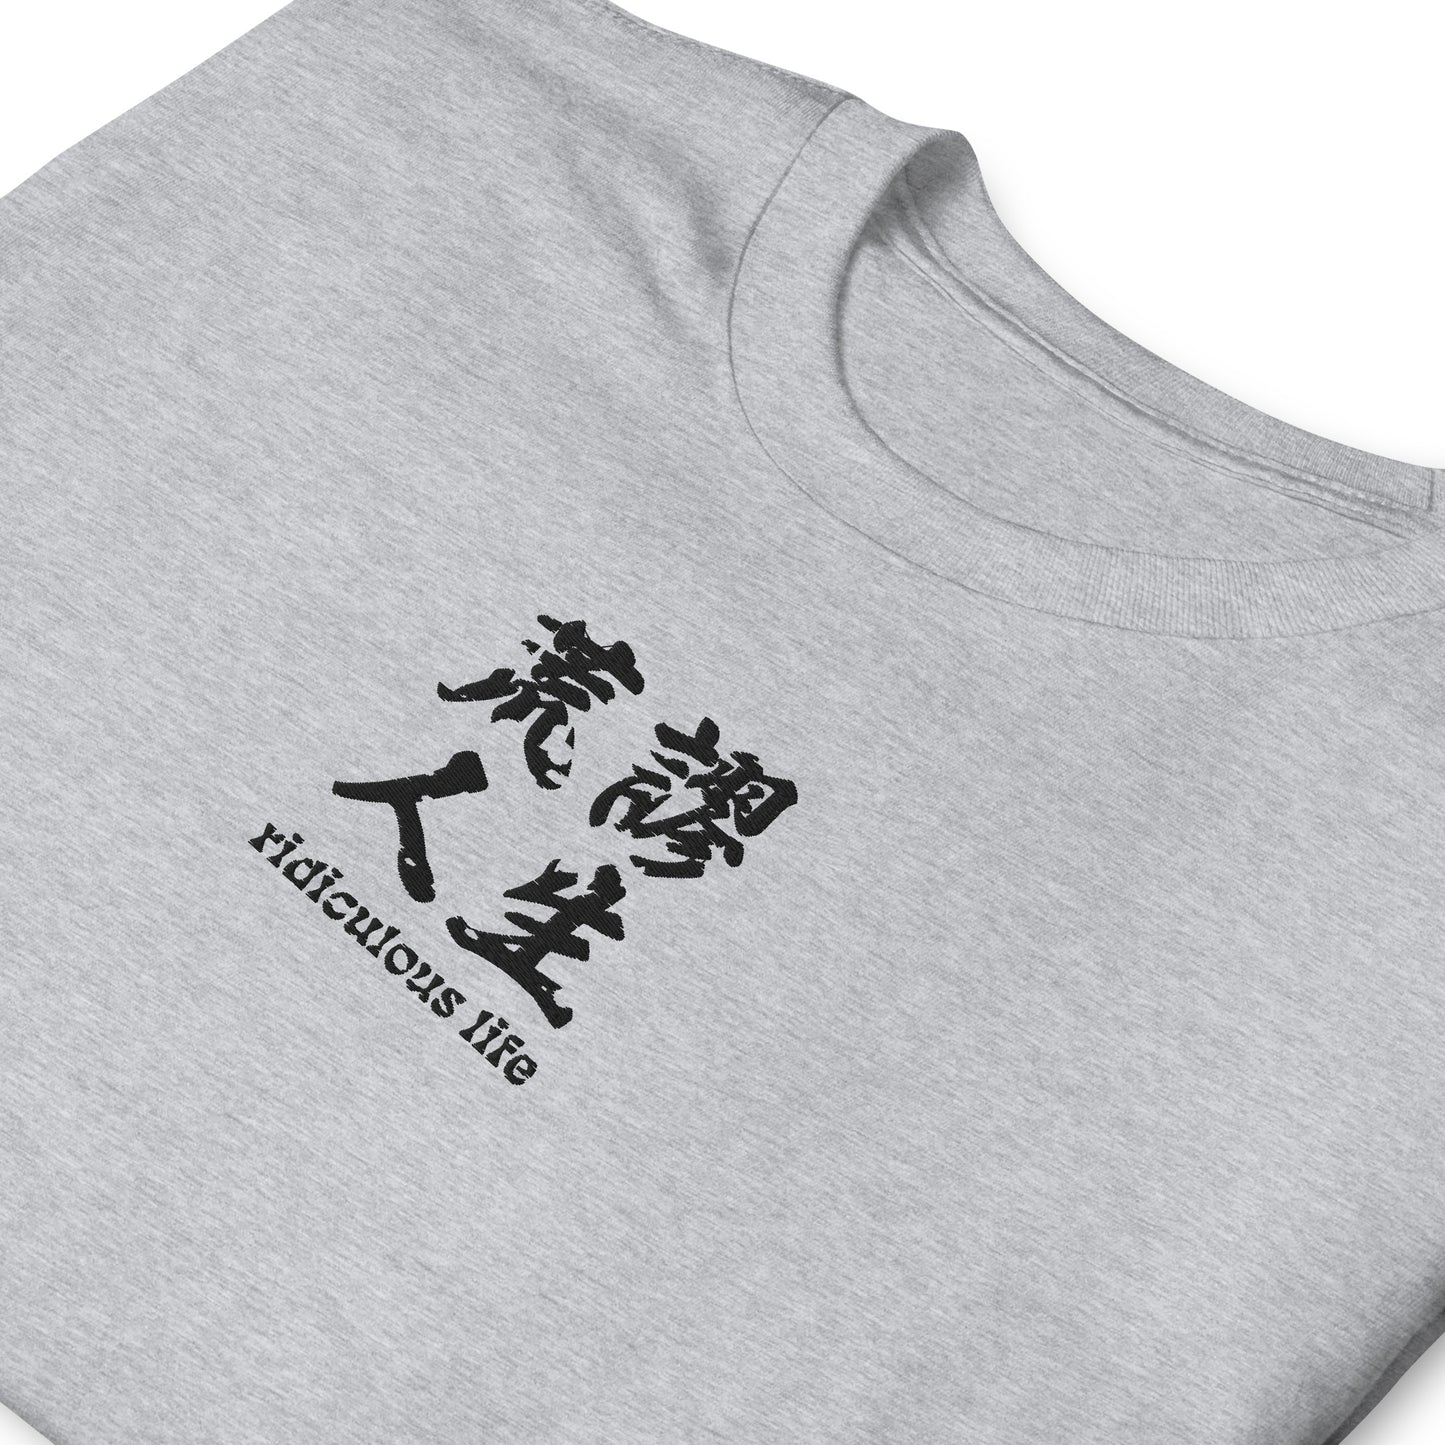 Light Gray High Quality Tee - Front Design with an Black Embroidery "Ridiculous Life" in Chinese and English 